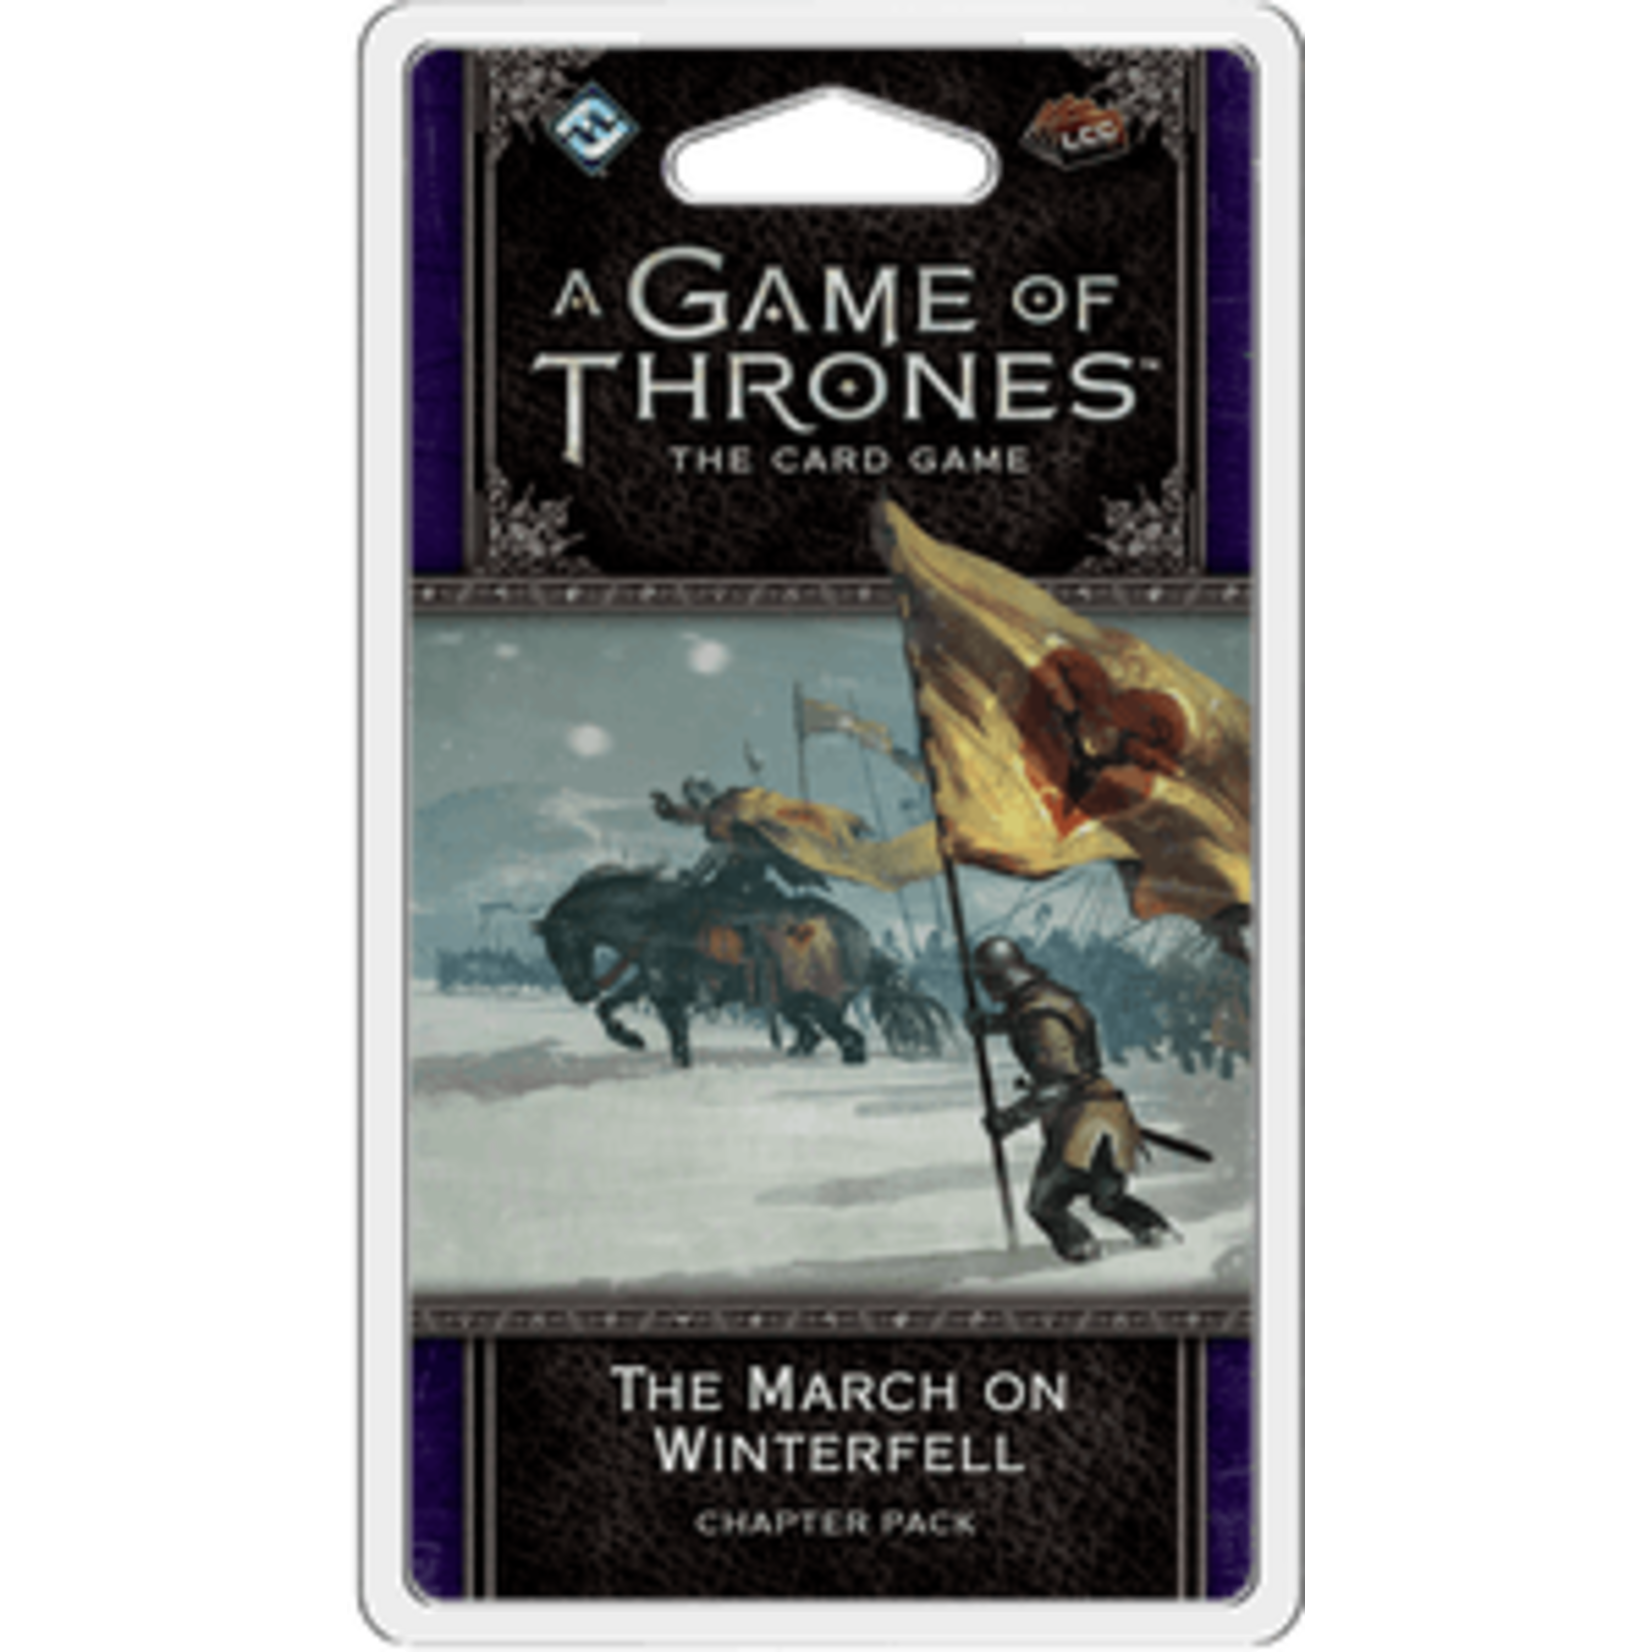 Game of Thrones LCG The March on Winterfell Chapter Pack